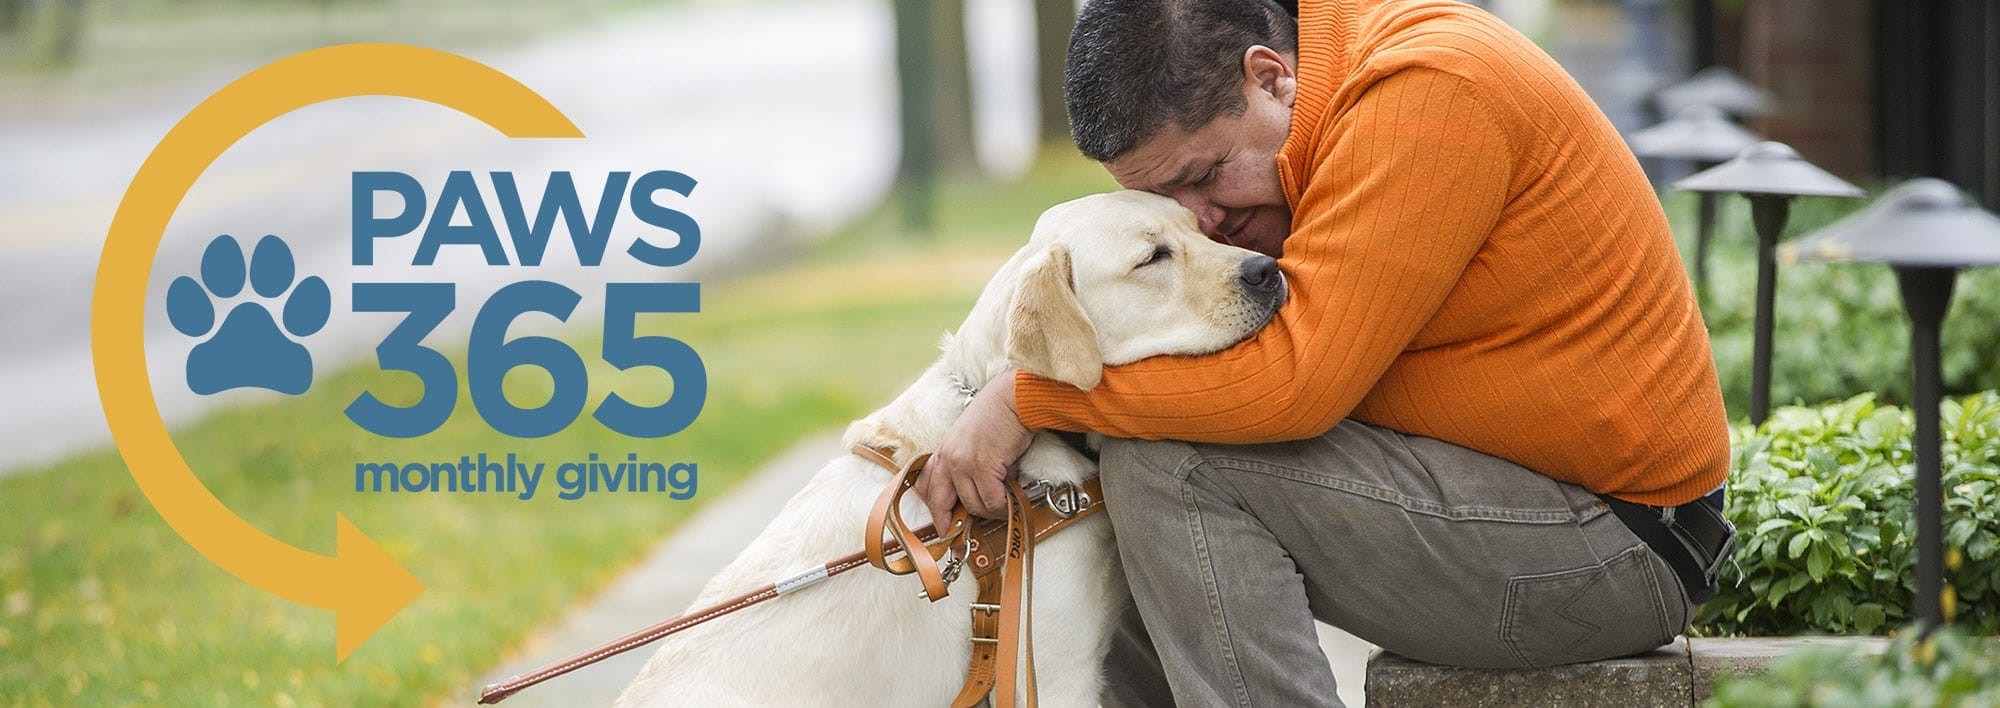 A man sits on a low wall next to a sidewalk hugging a yellow lab in harness. The man is leaning forward with his head touching the dog's head. The Paws 365 logo is displayed on the left side of the picture